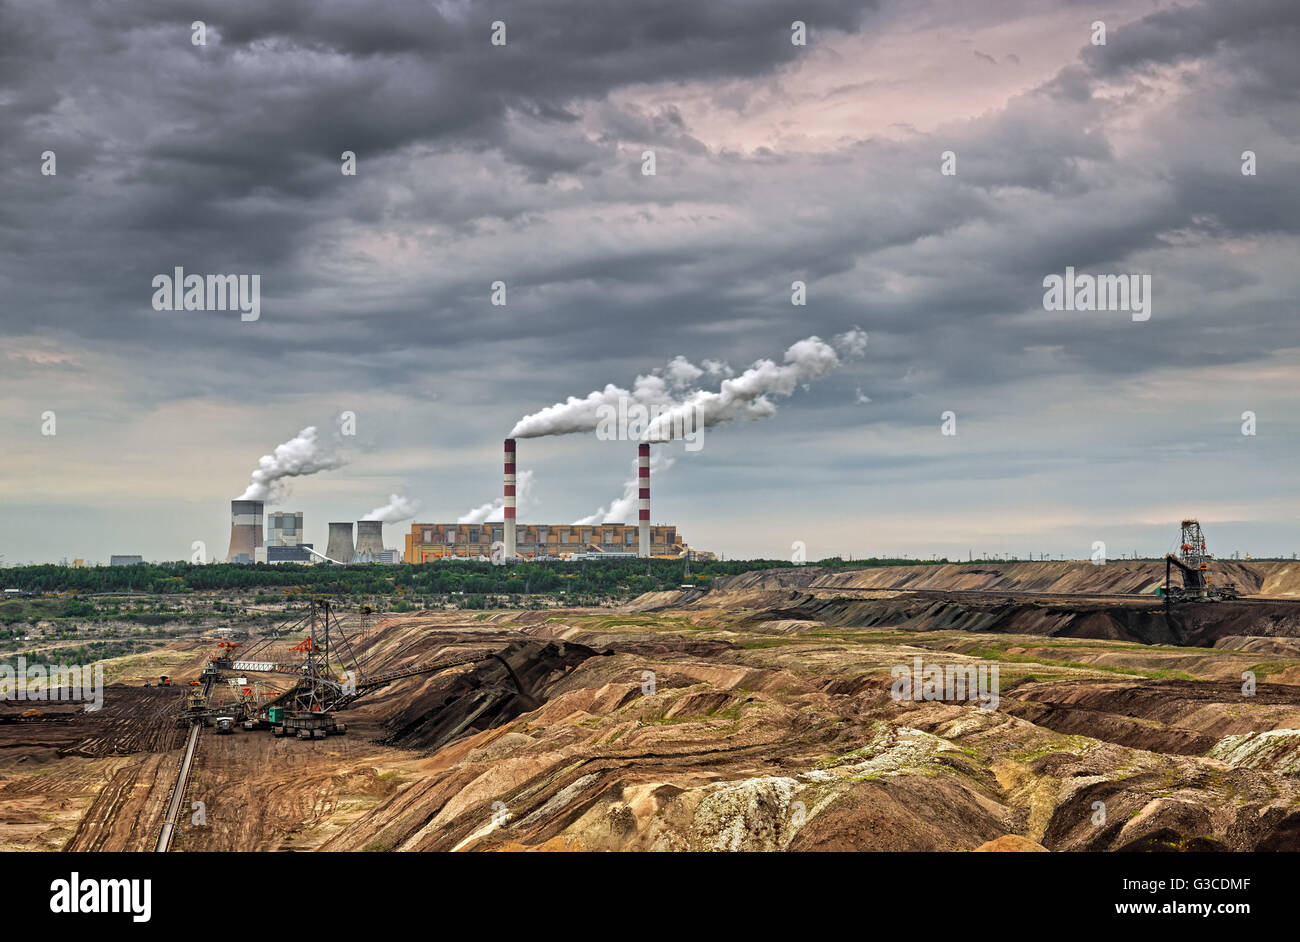 Open pit mine and power plant. HDR - high dynamic range Stock Photo